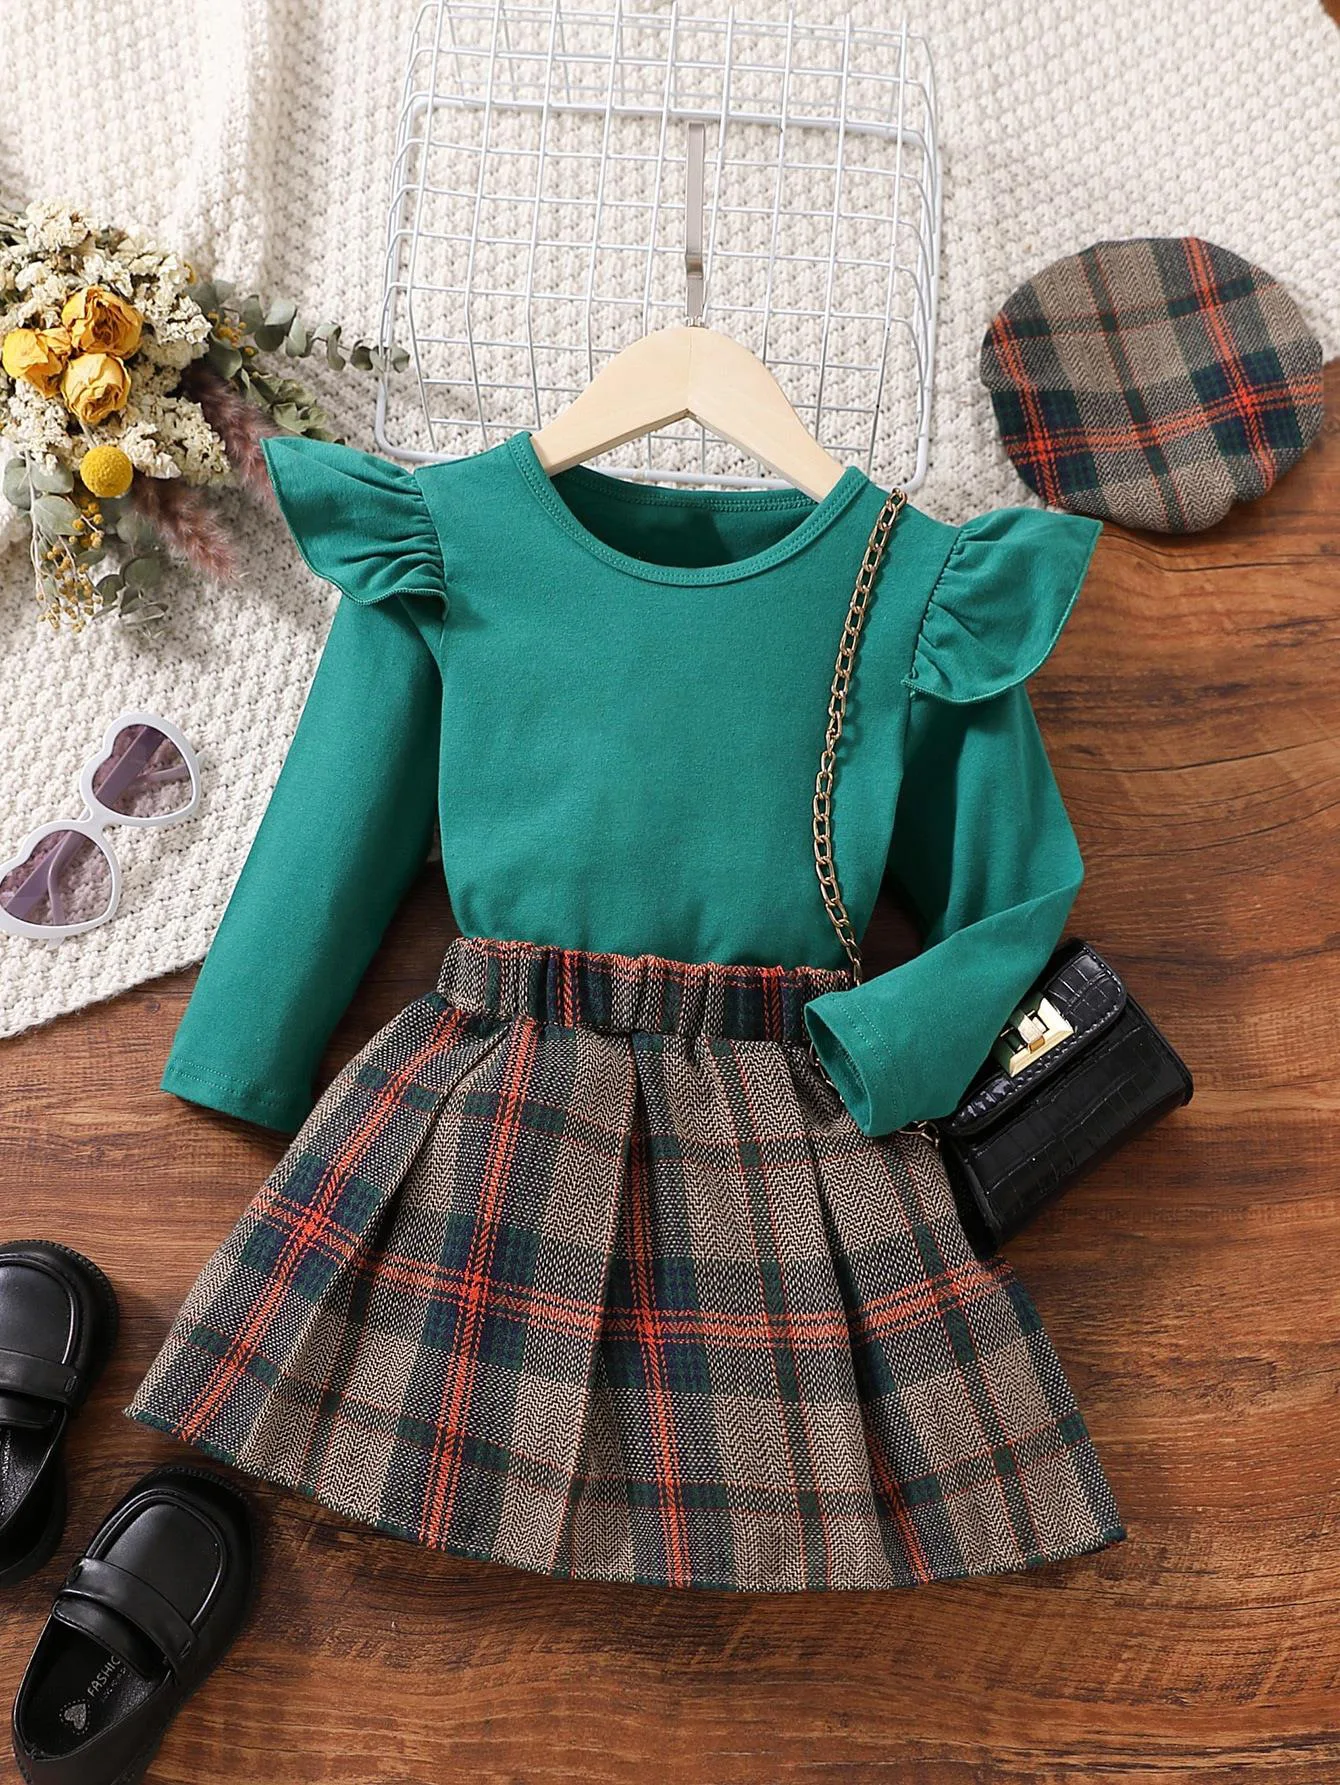 Hot sale fashion toddler dress clothing sets solid knitting shirts match plaid pleated skirt casual girls outfits with hat